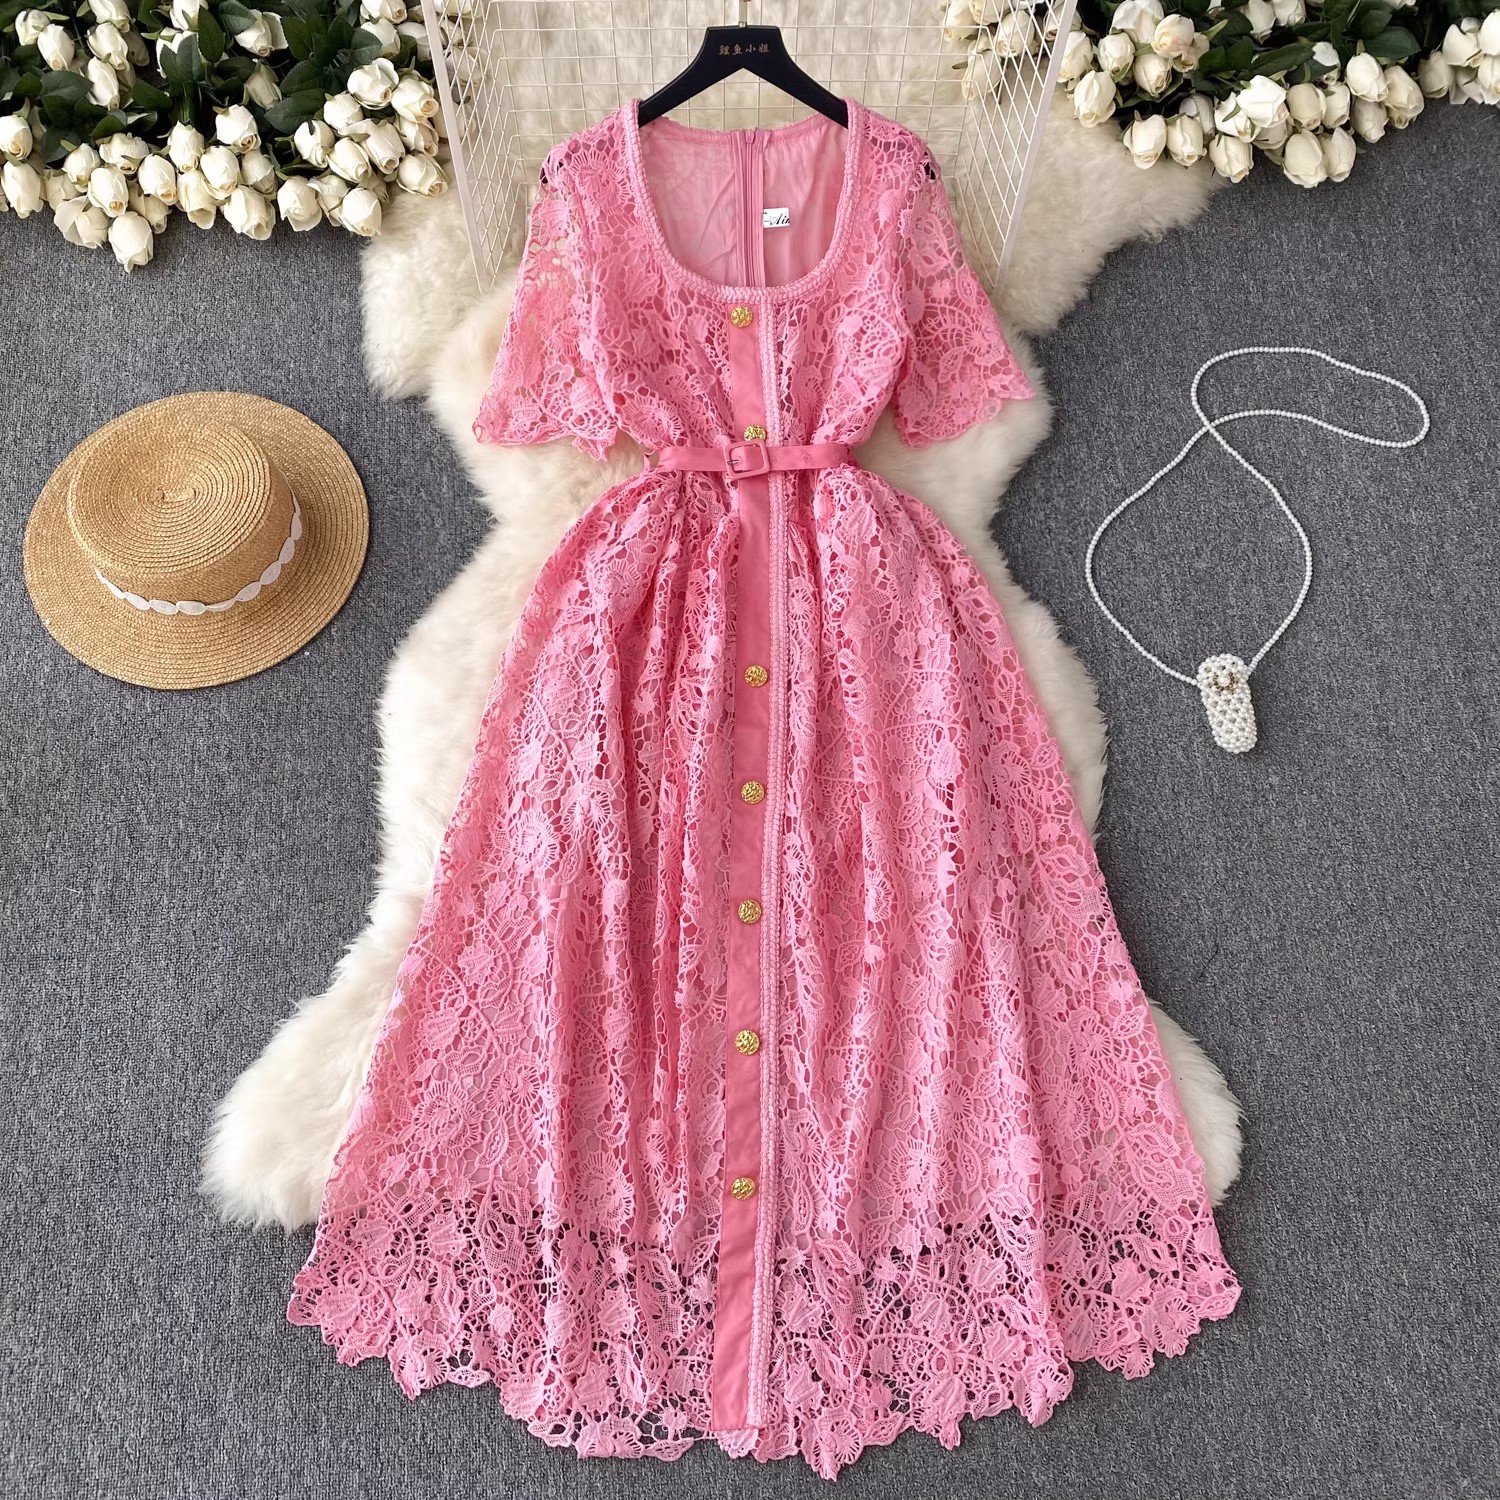 Basic Casual Dresses Summer Runway Blue Pink Black Water Soluble Lace Flower Embroidery Dress Women